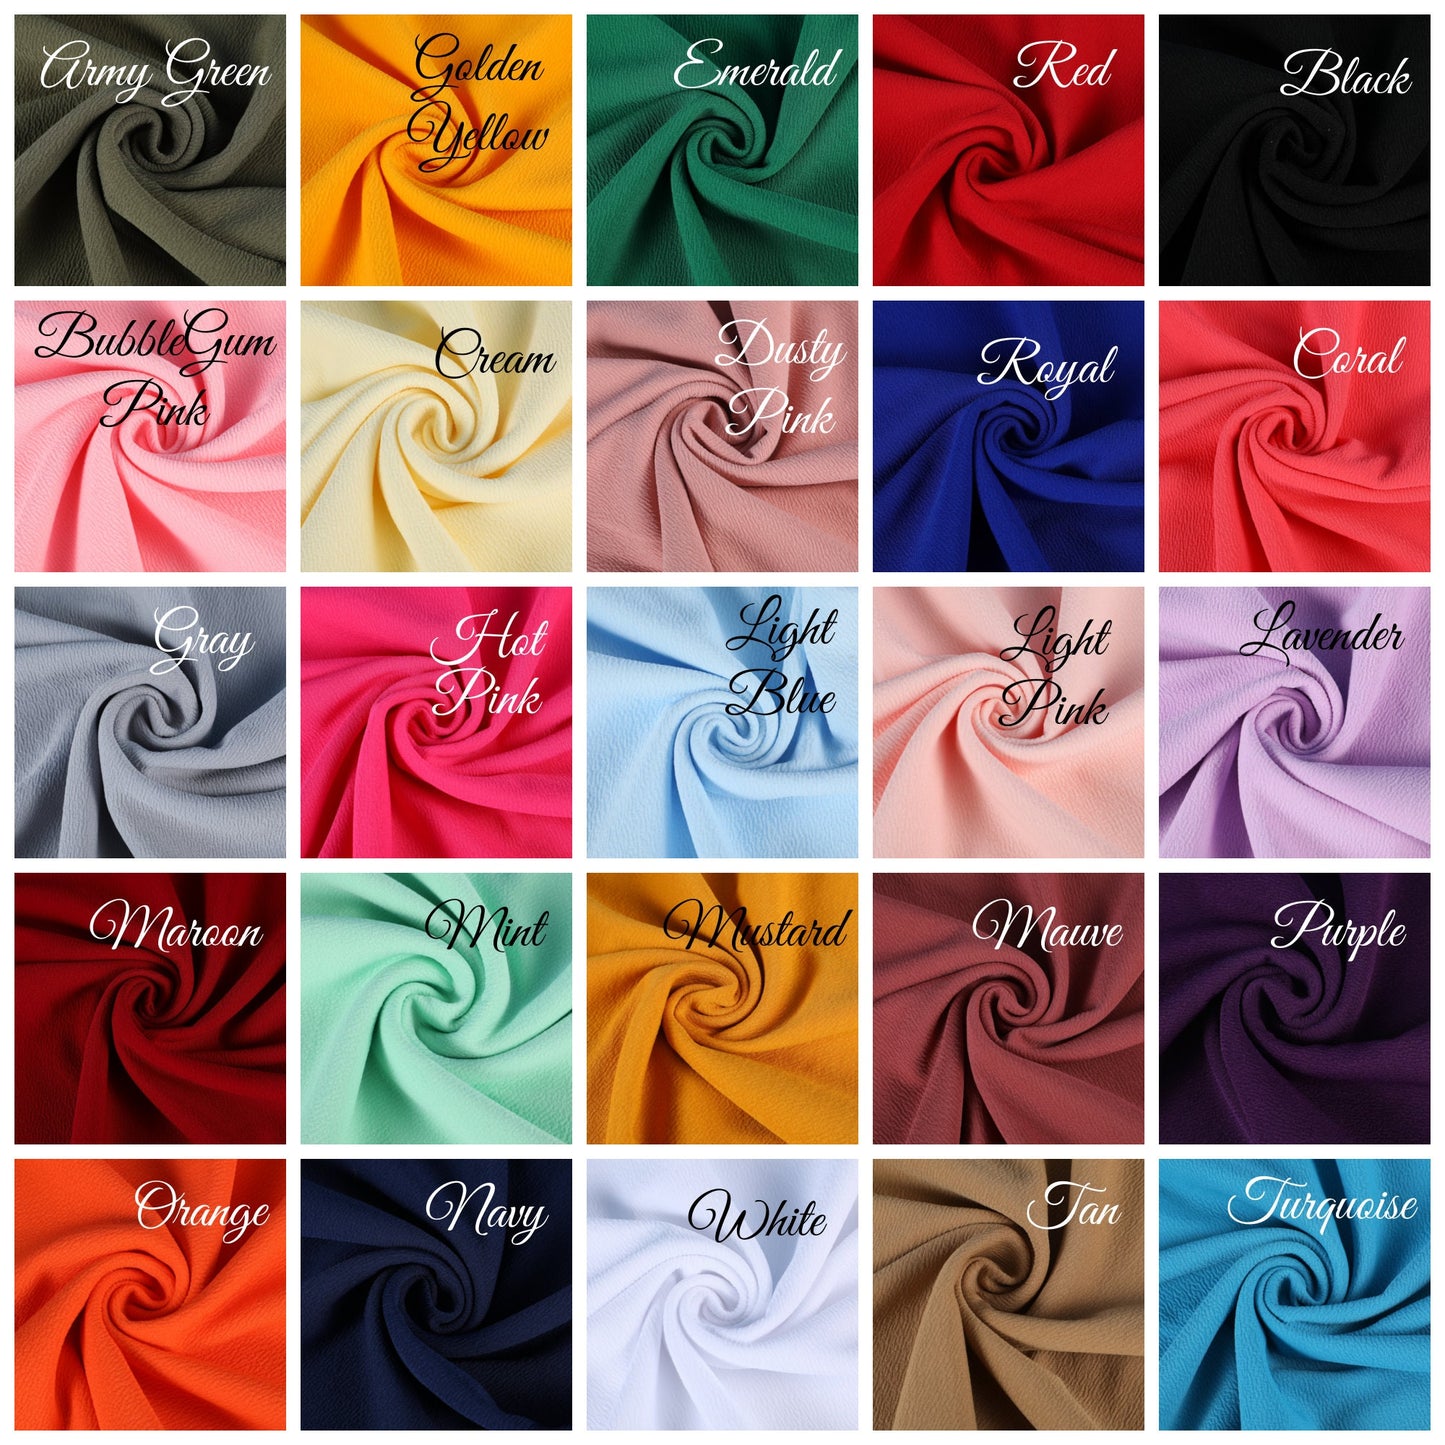 NEW STYLE 25 Colors - 1 Yard - Bundle Mix Liverpool Fabric 4 Way Stretch Solid Strip Thick Knit Jersey Fabric for Bows Grab Bag Sampler